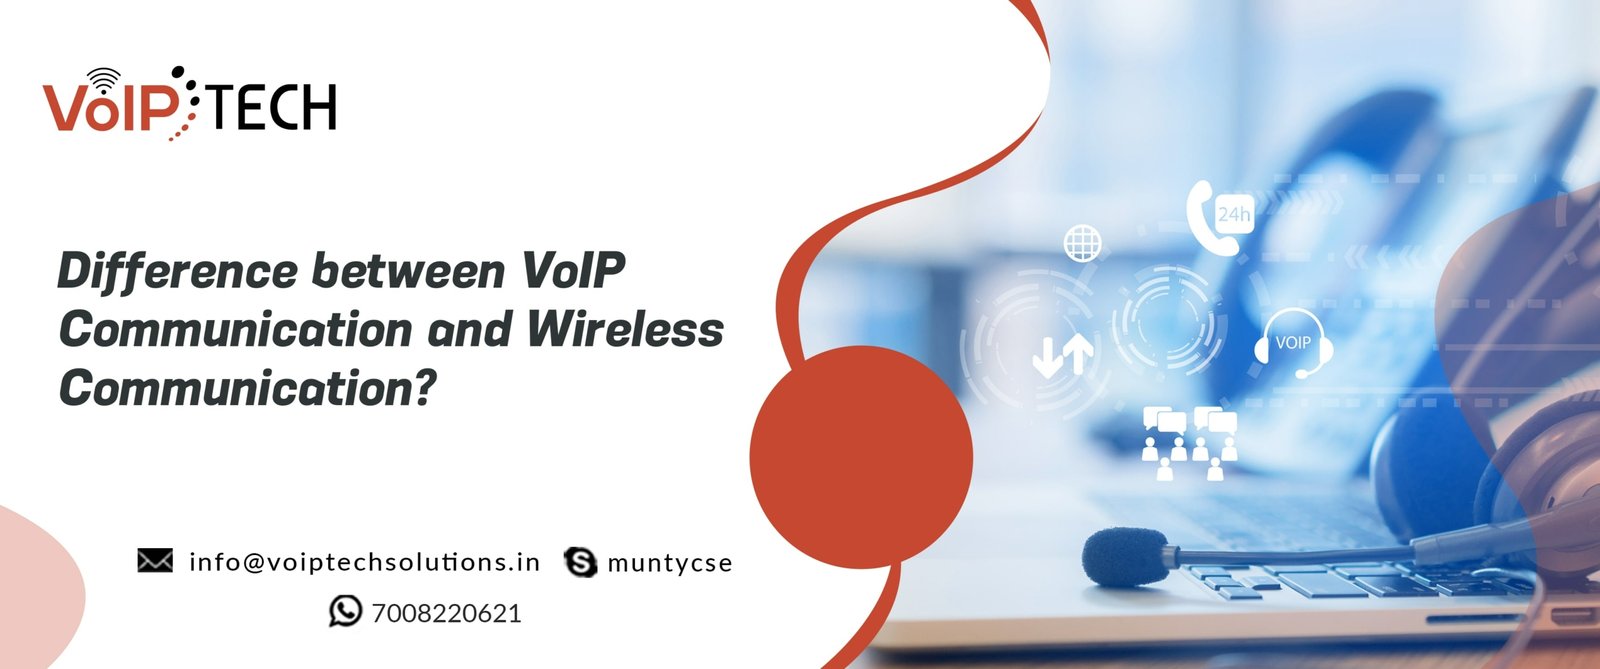 Difference between VoIP communication and wireless communication?, VoIP tech solutions, vici dialer, virtual number, Voip Providers, voip services in india, best sip provider, business voip providers, VoIP Phone Numbers, voip minutes provider, top voip providers, voip minutes, International VoIP Provider